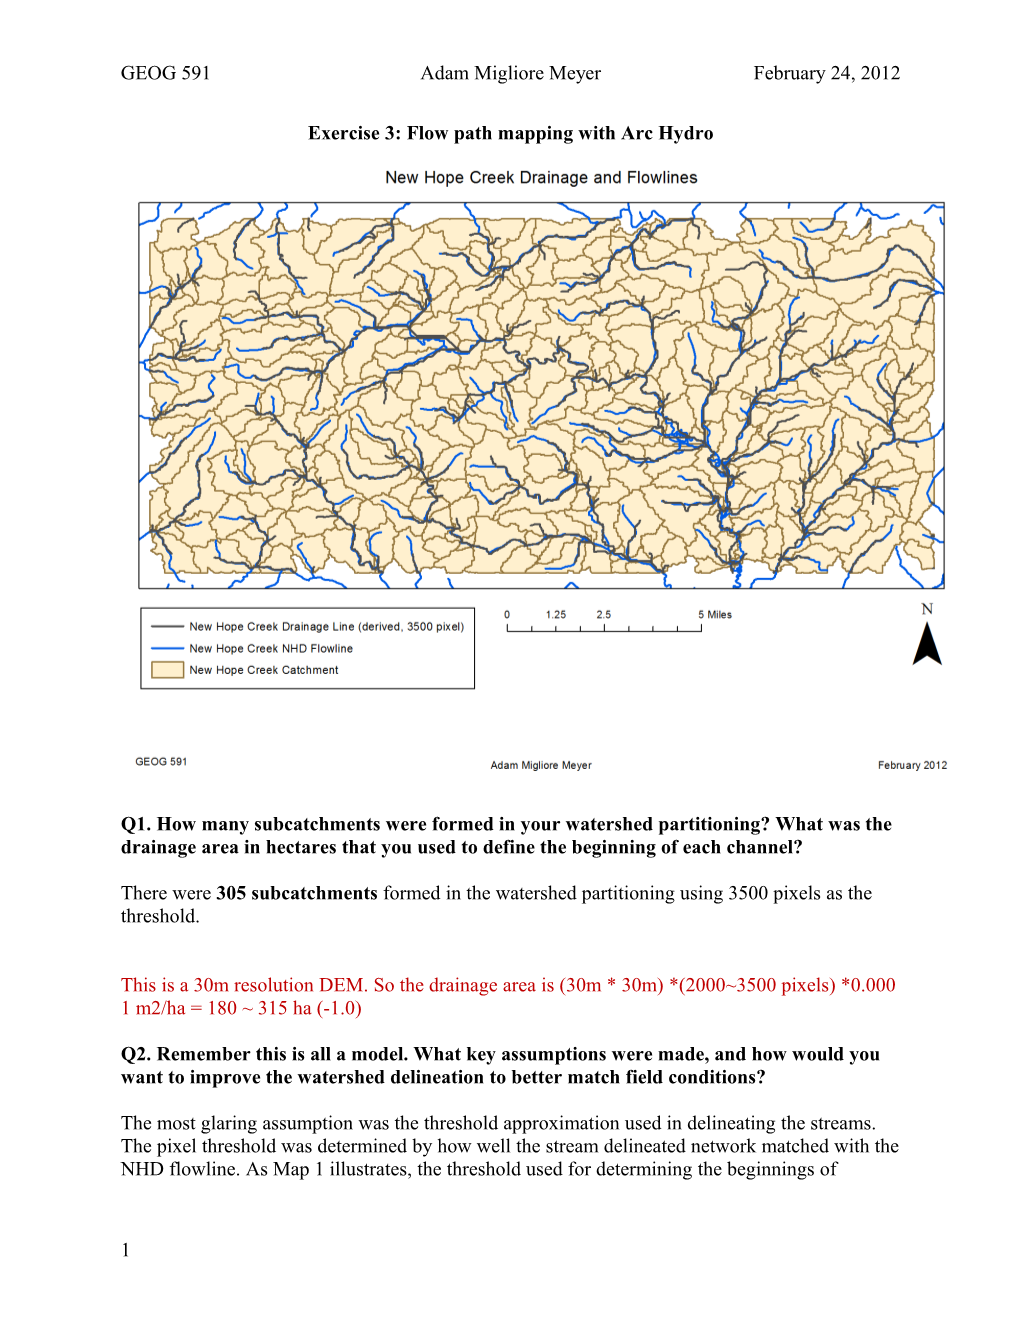 Exercise 3: Flow Path Mapping with Arc Hydro